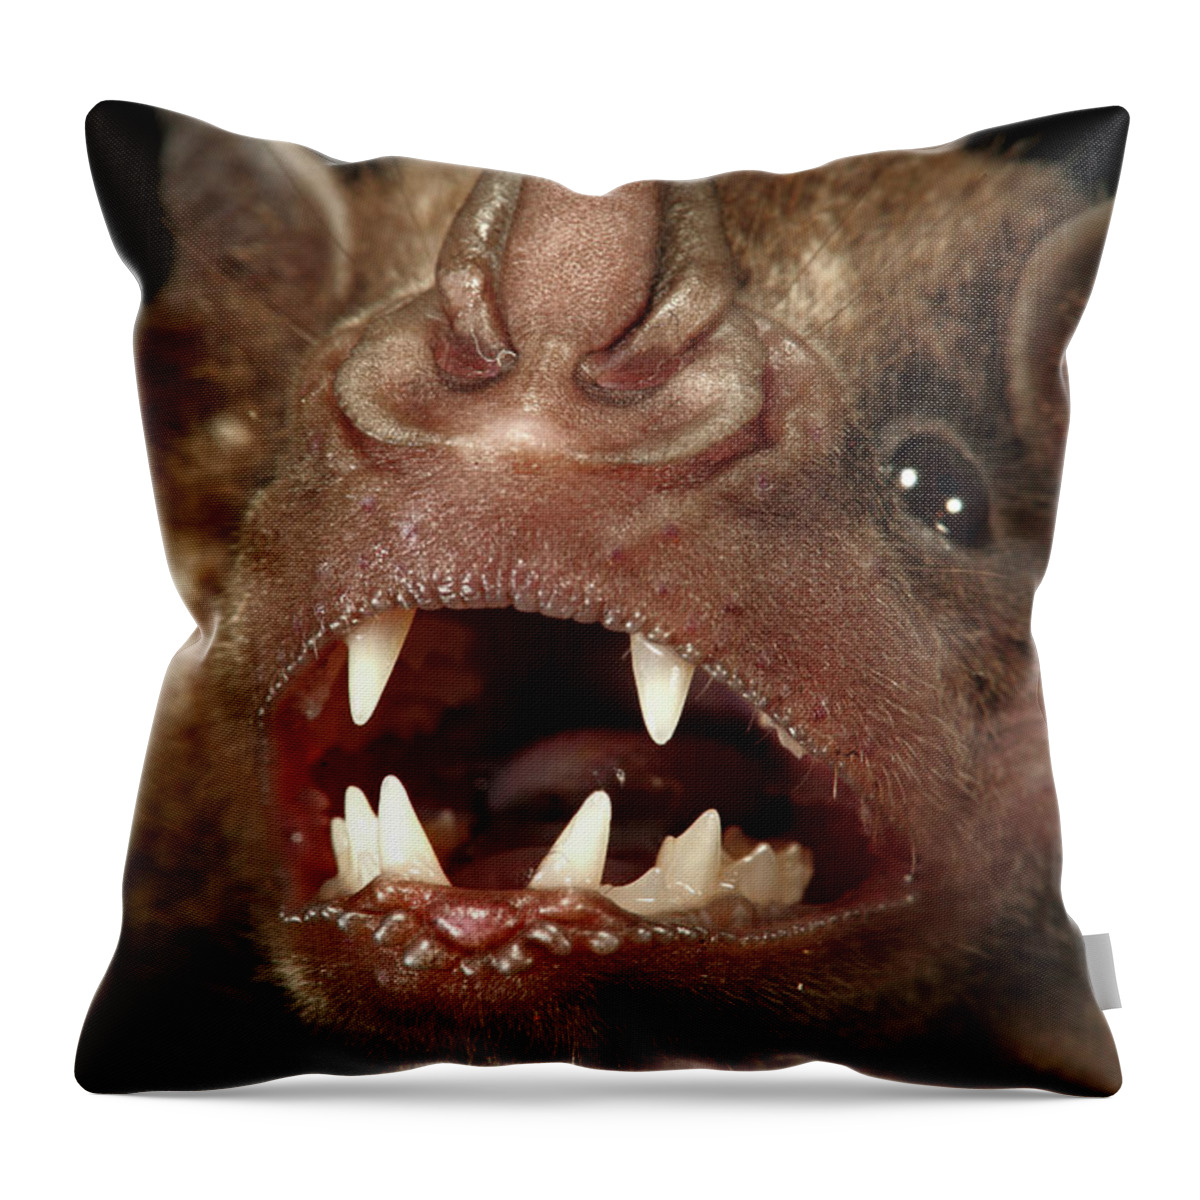 00463278 Throw Pillow featuring the photograph Greater Spear-nosed Bat by Christian Ziegler